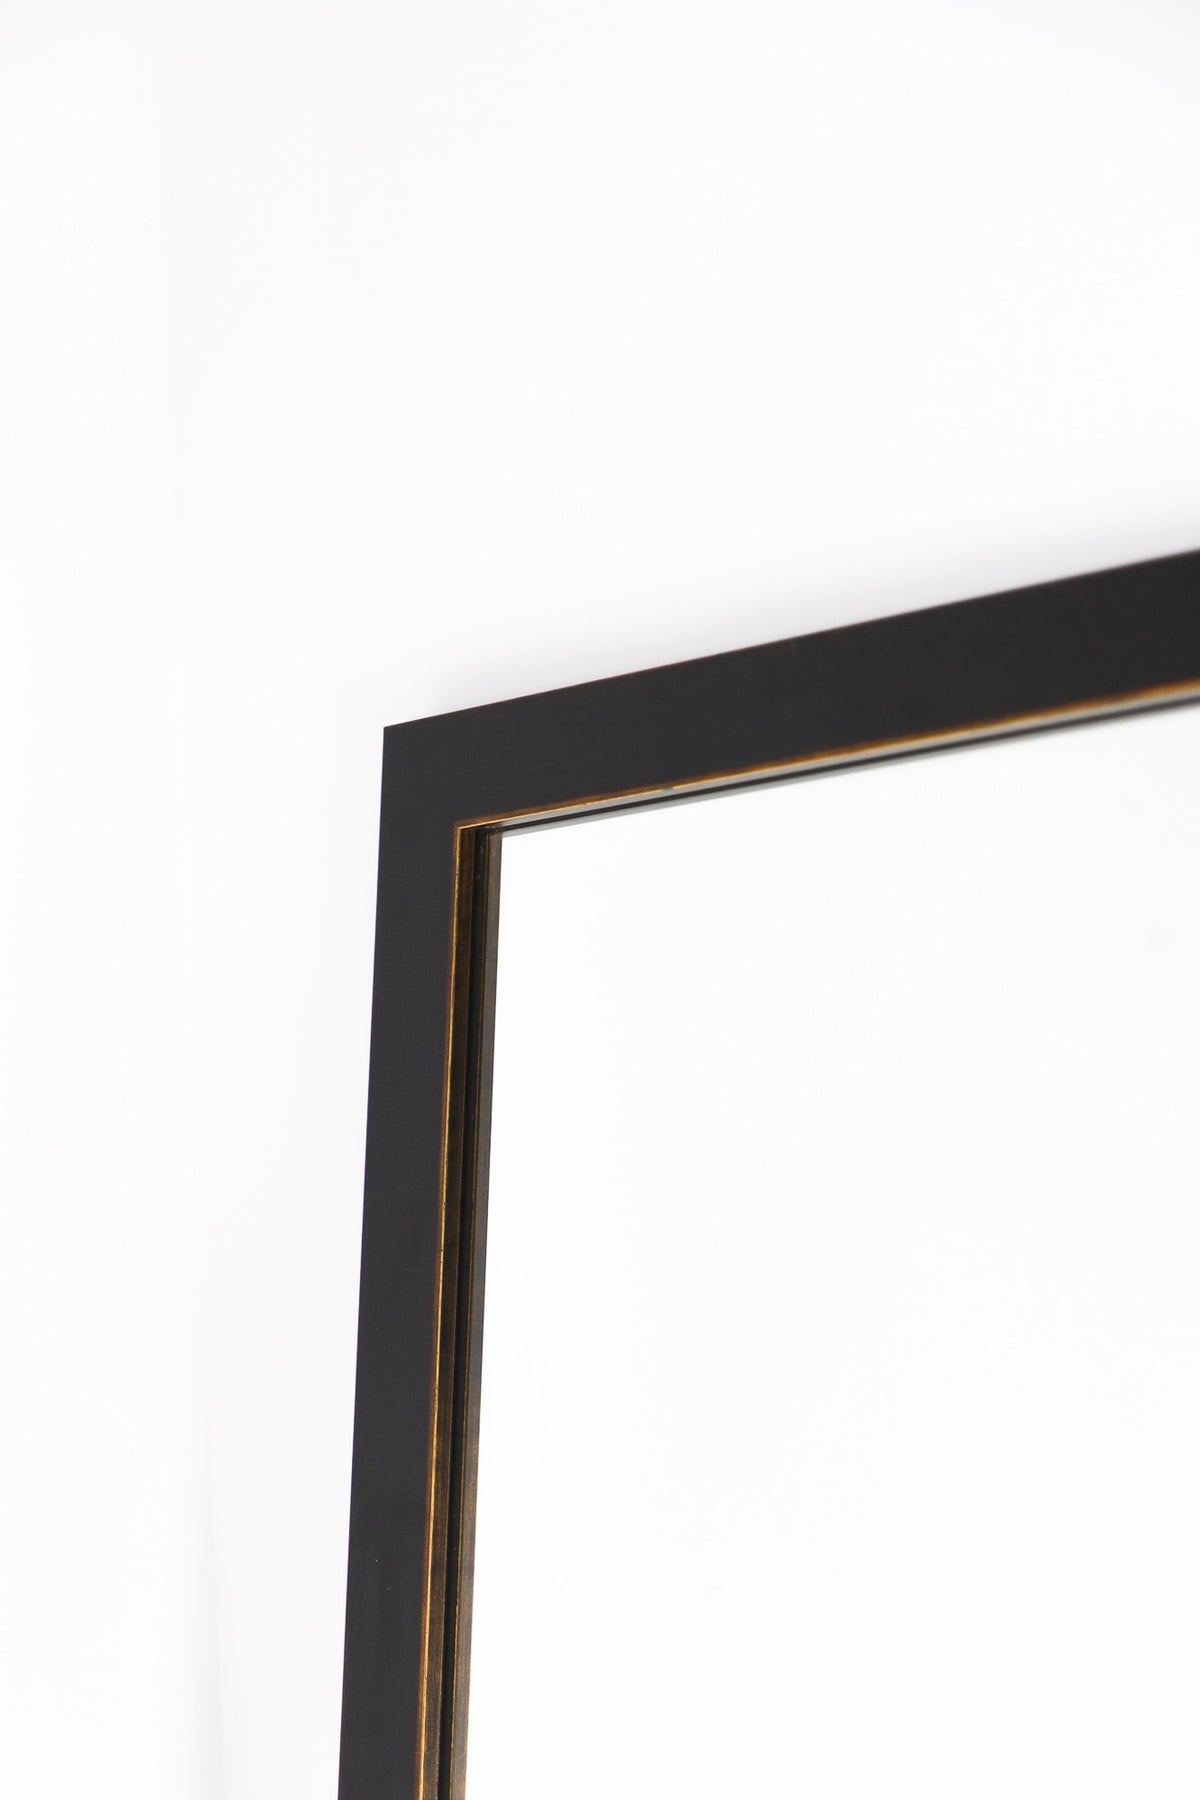 Mirror in our black gold trimmed frame